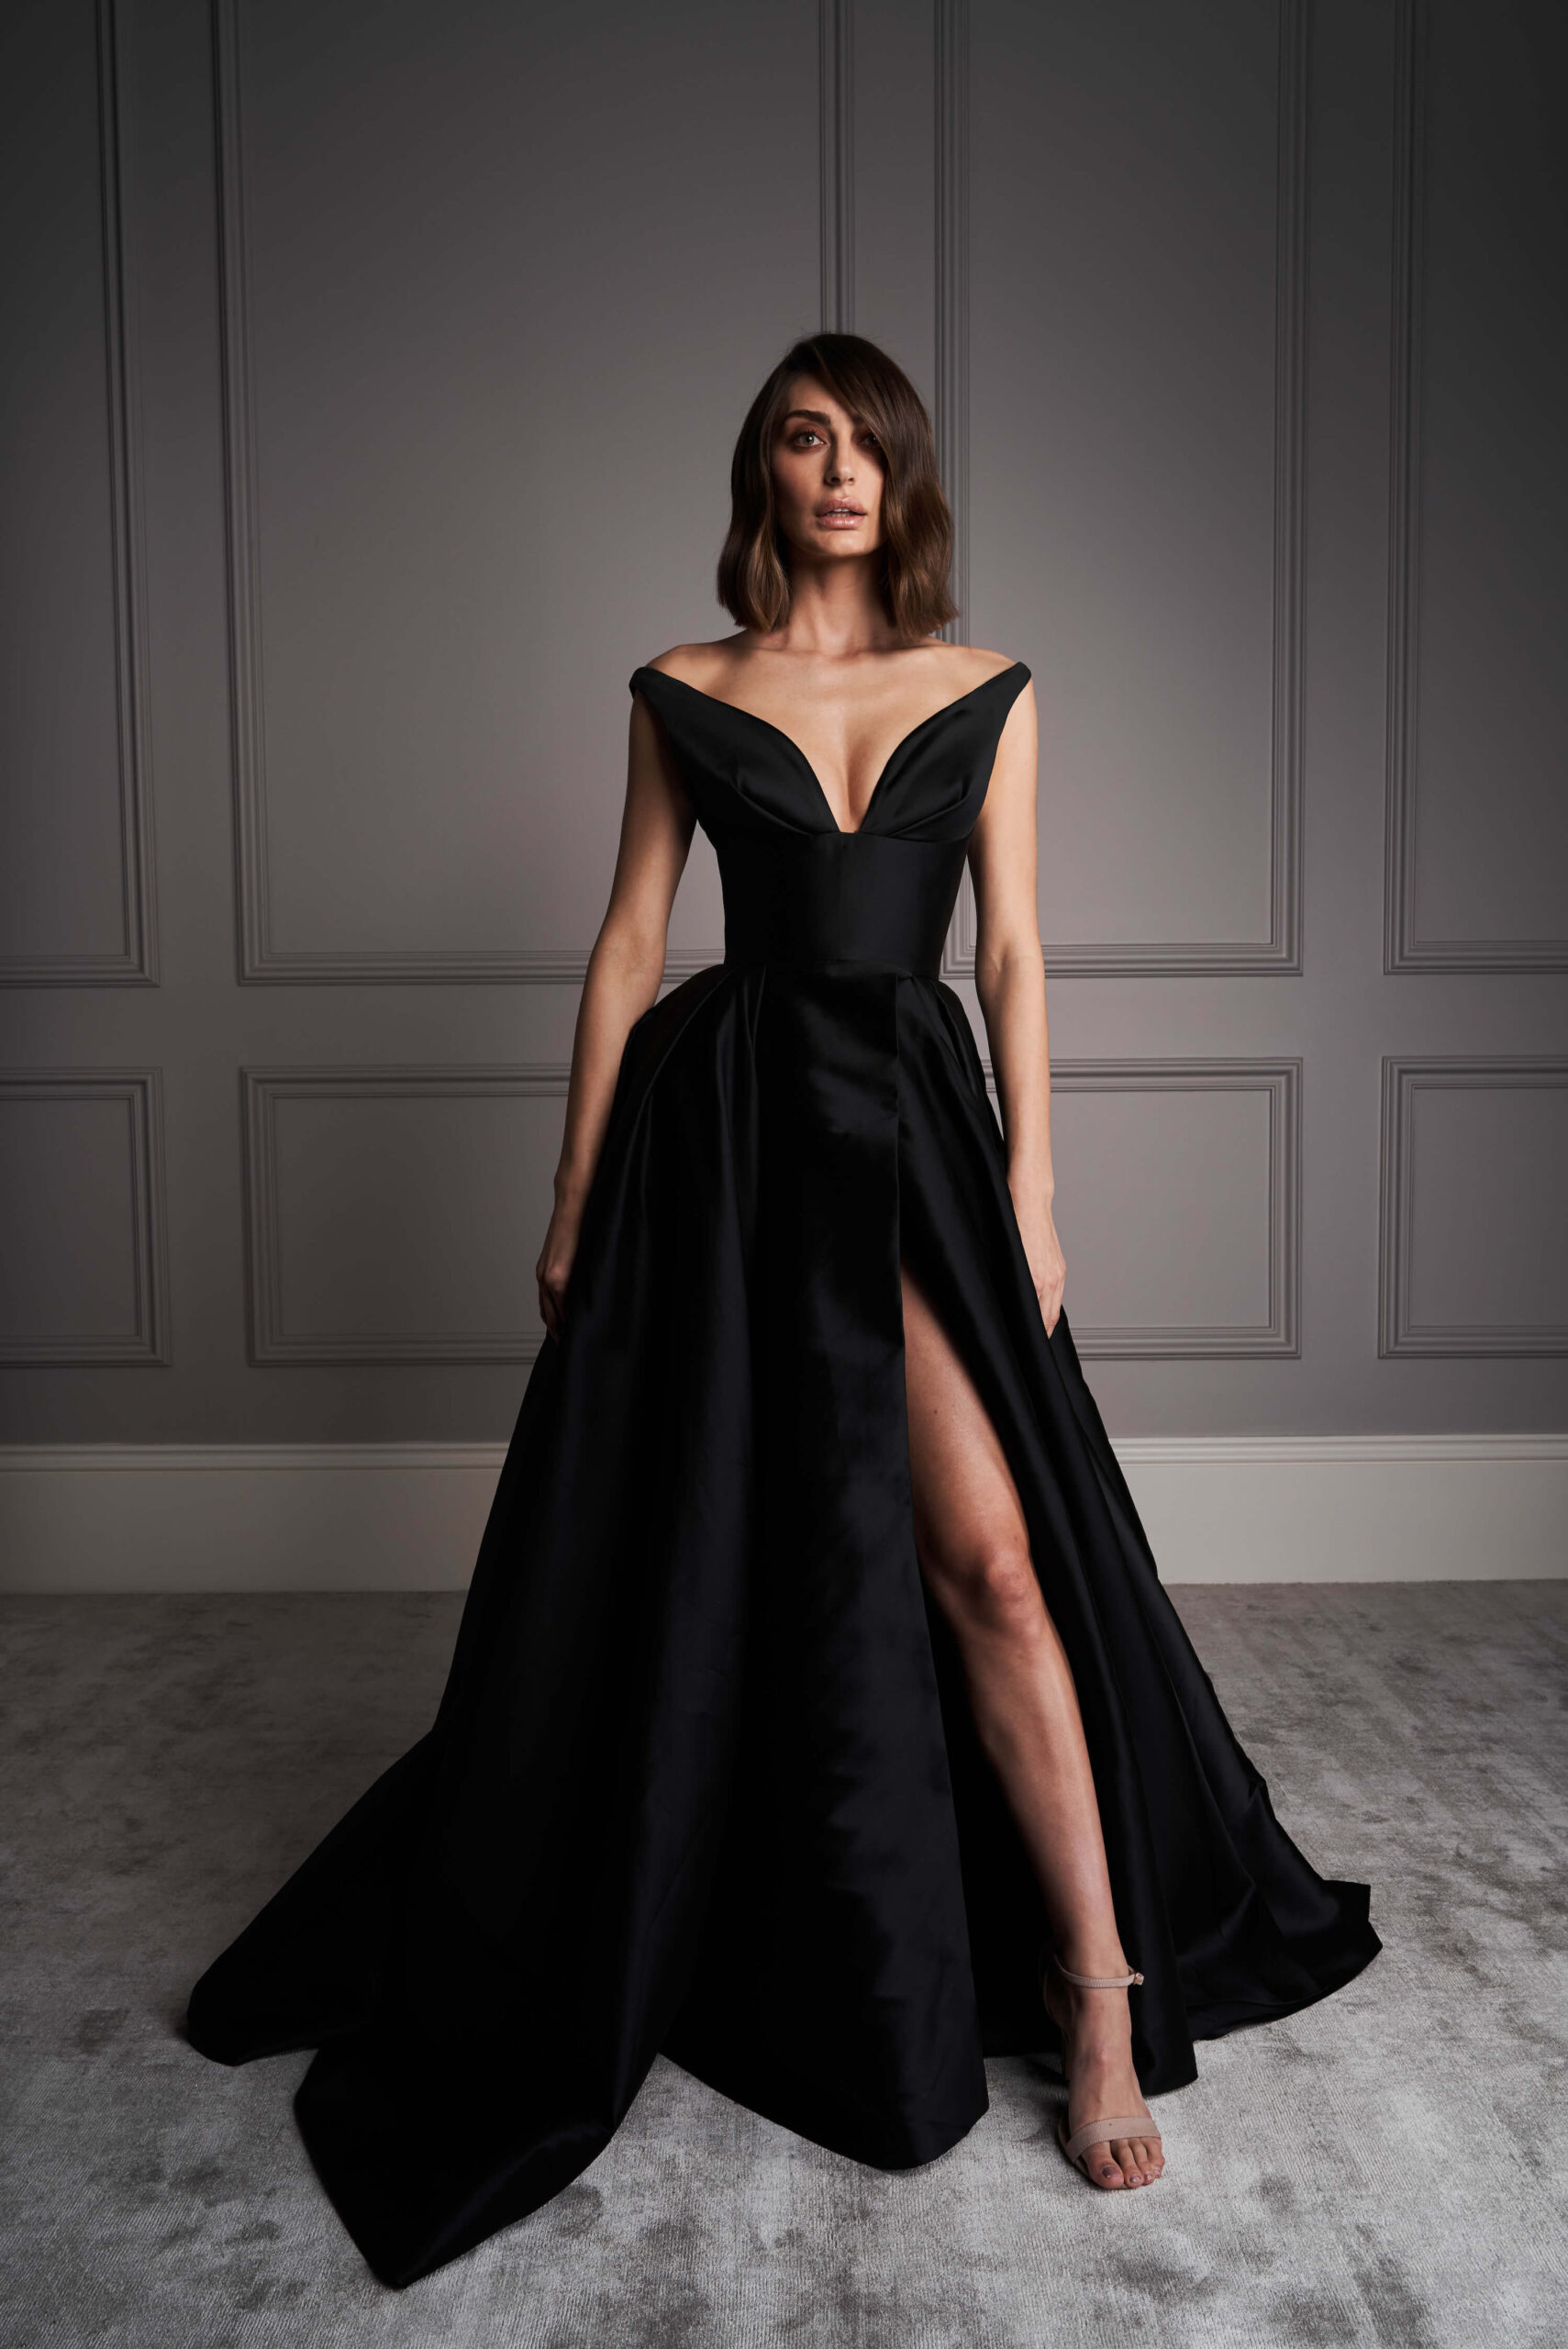 Darling off shoulder sleeves ornament this black bridal gown. a asymmetric slit compliments the gown structure